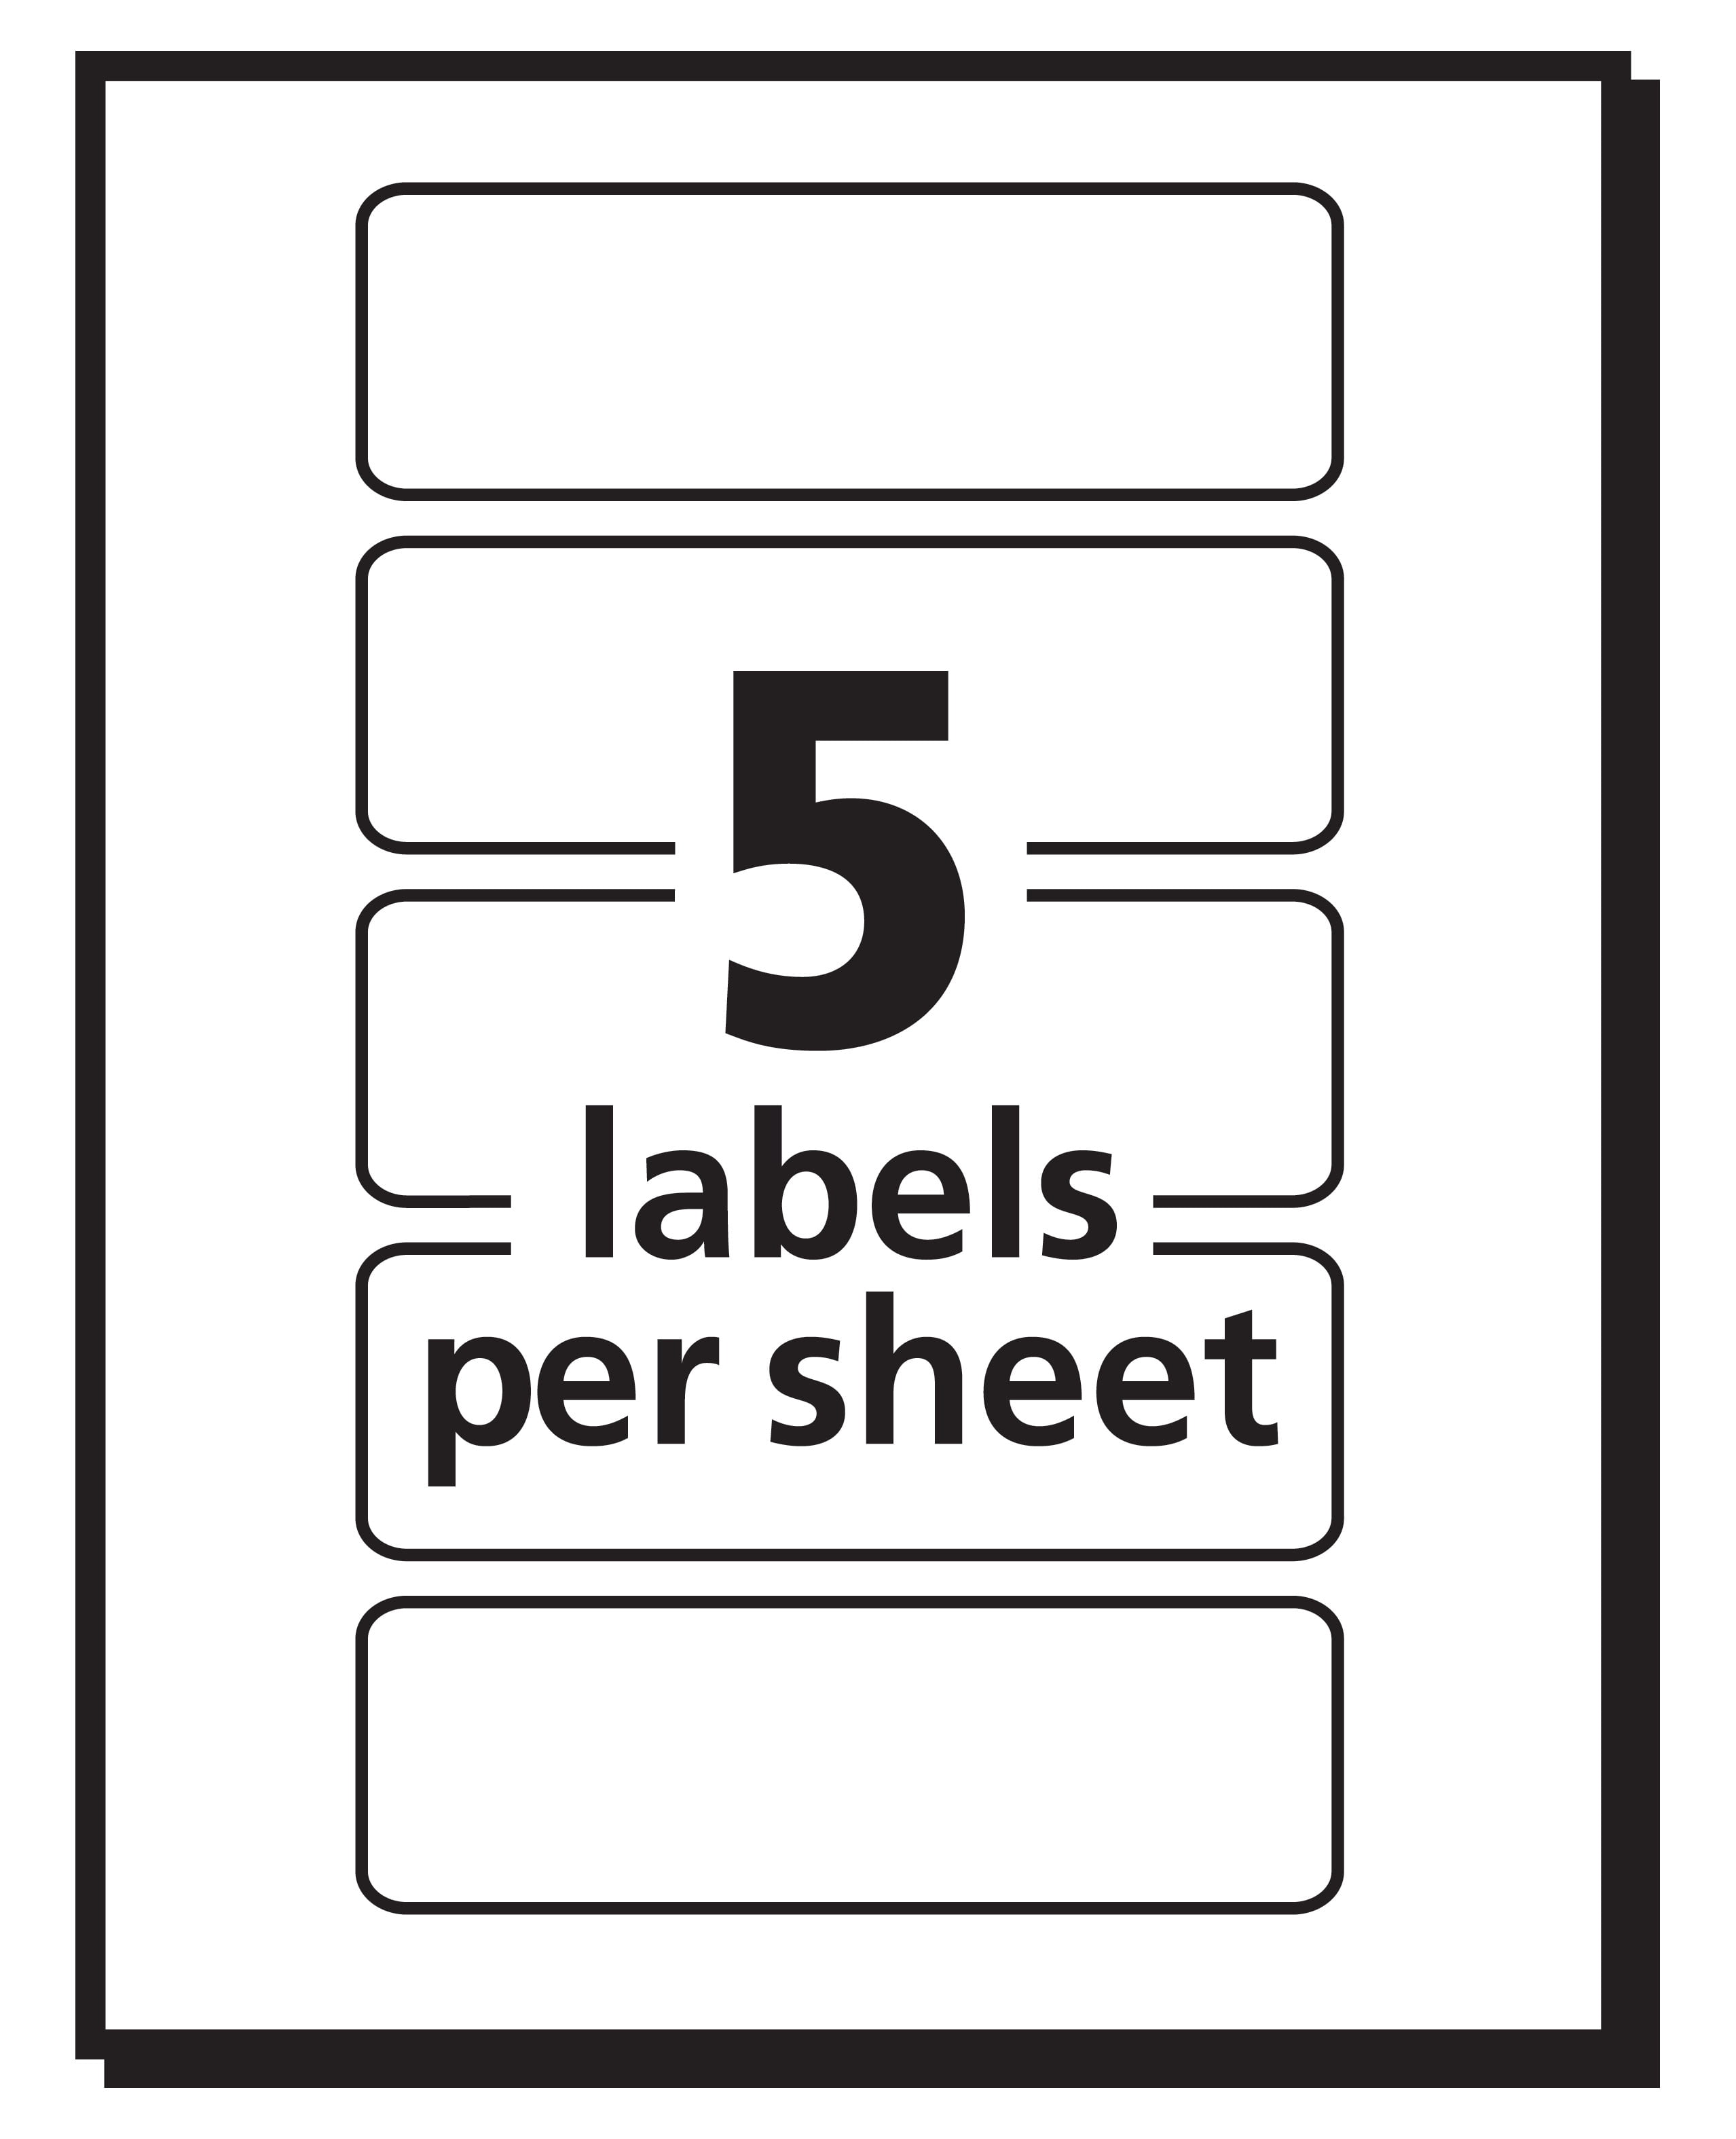 5436 Avery Removable Print/Write Labels 1 x 3 Inches White 4 Packs Pack of 250